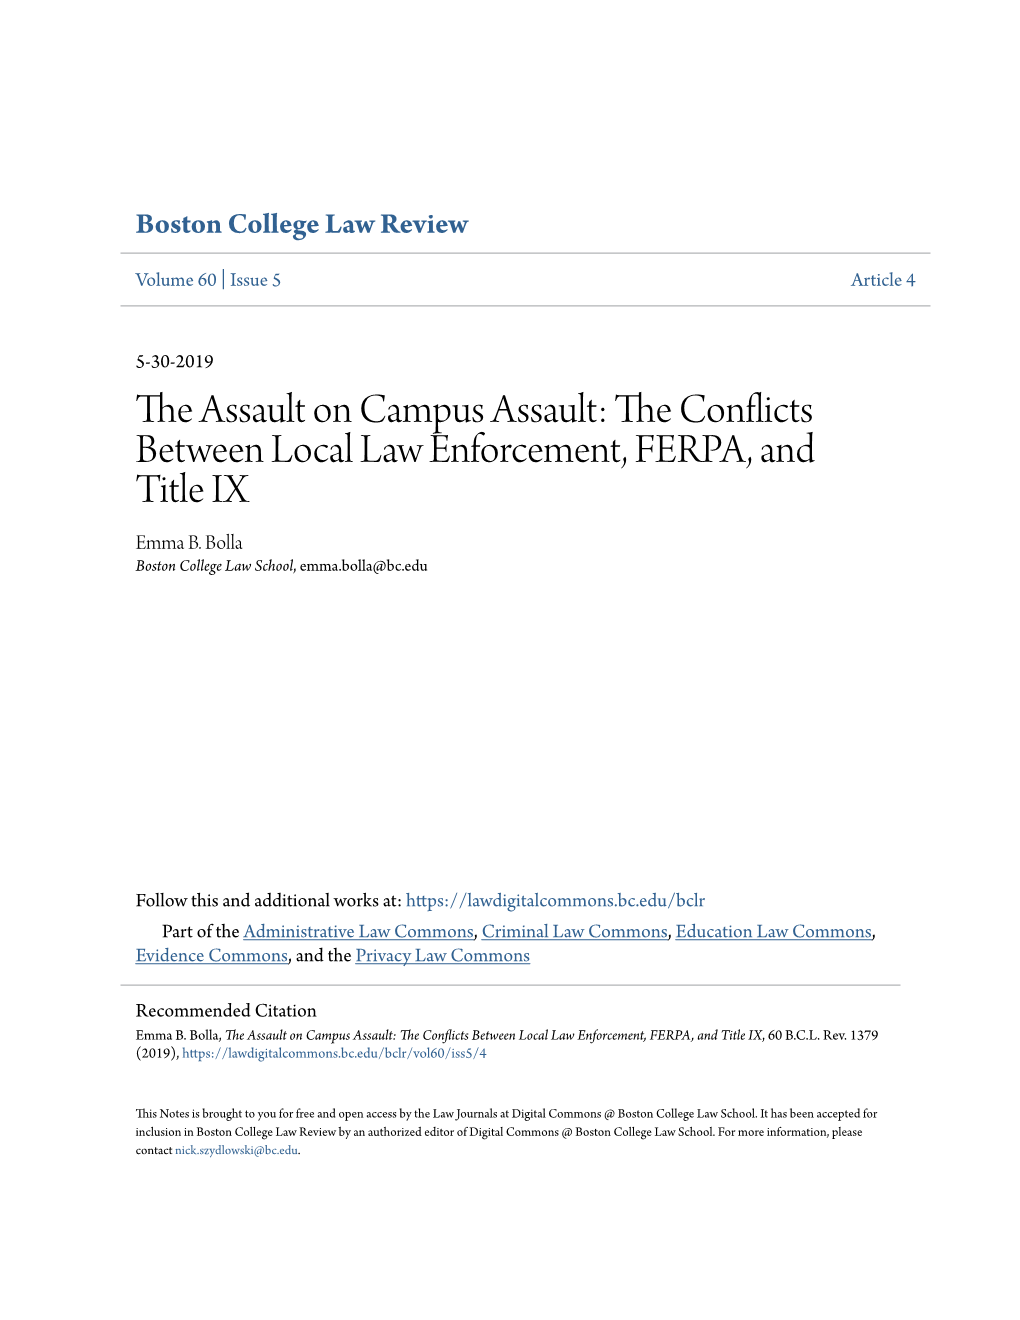 The Conflicts Between Local Law Enforcement, FERPA, and Title IX, 60 B.C.L